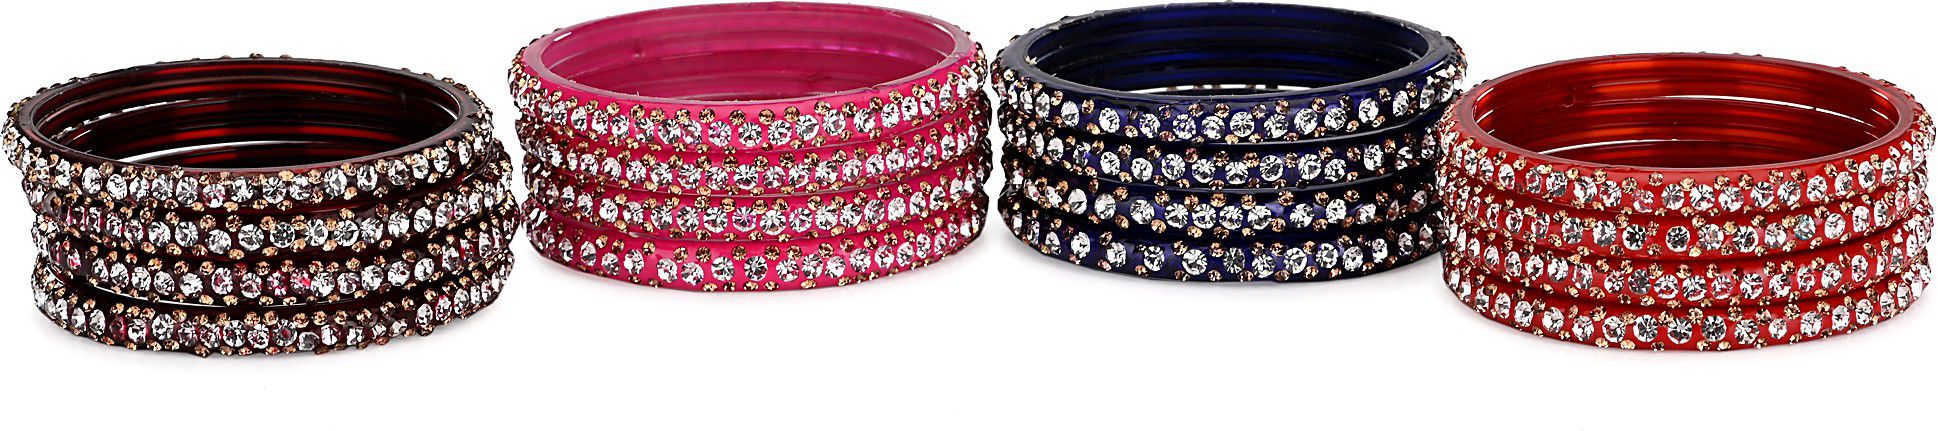     			Somil Designer Bridal Glass Bangle Set For Party Marriage, And Function, Ornamented, Colorful -S17_2.2